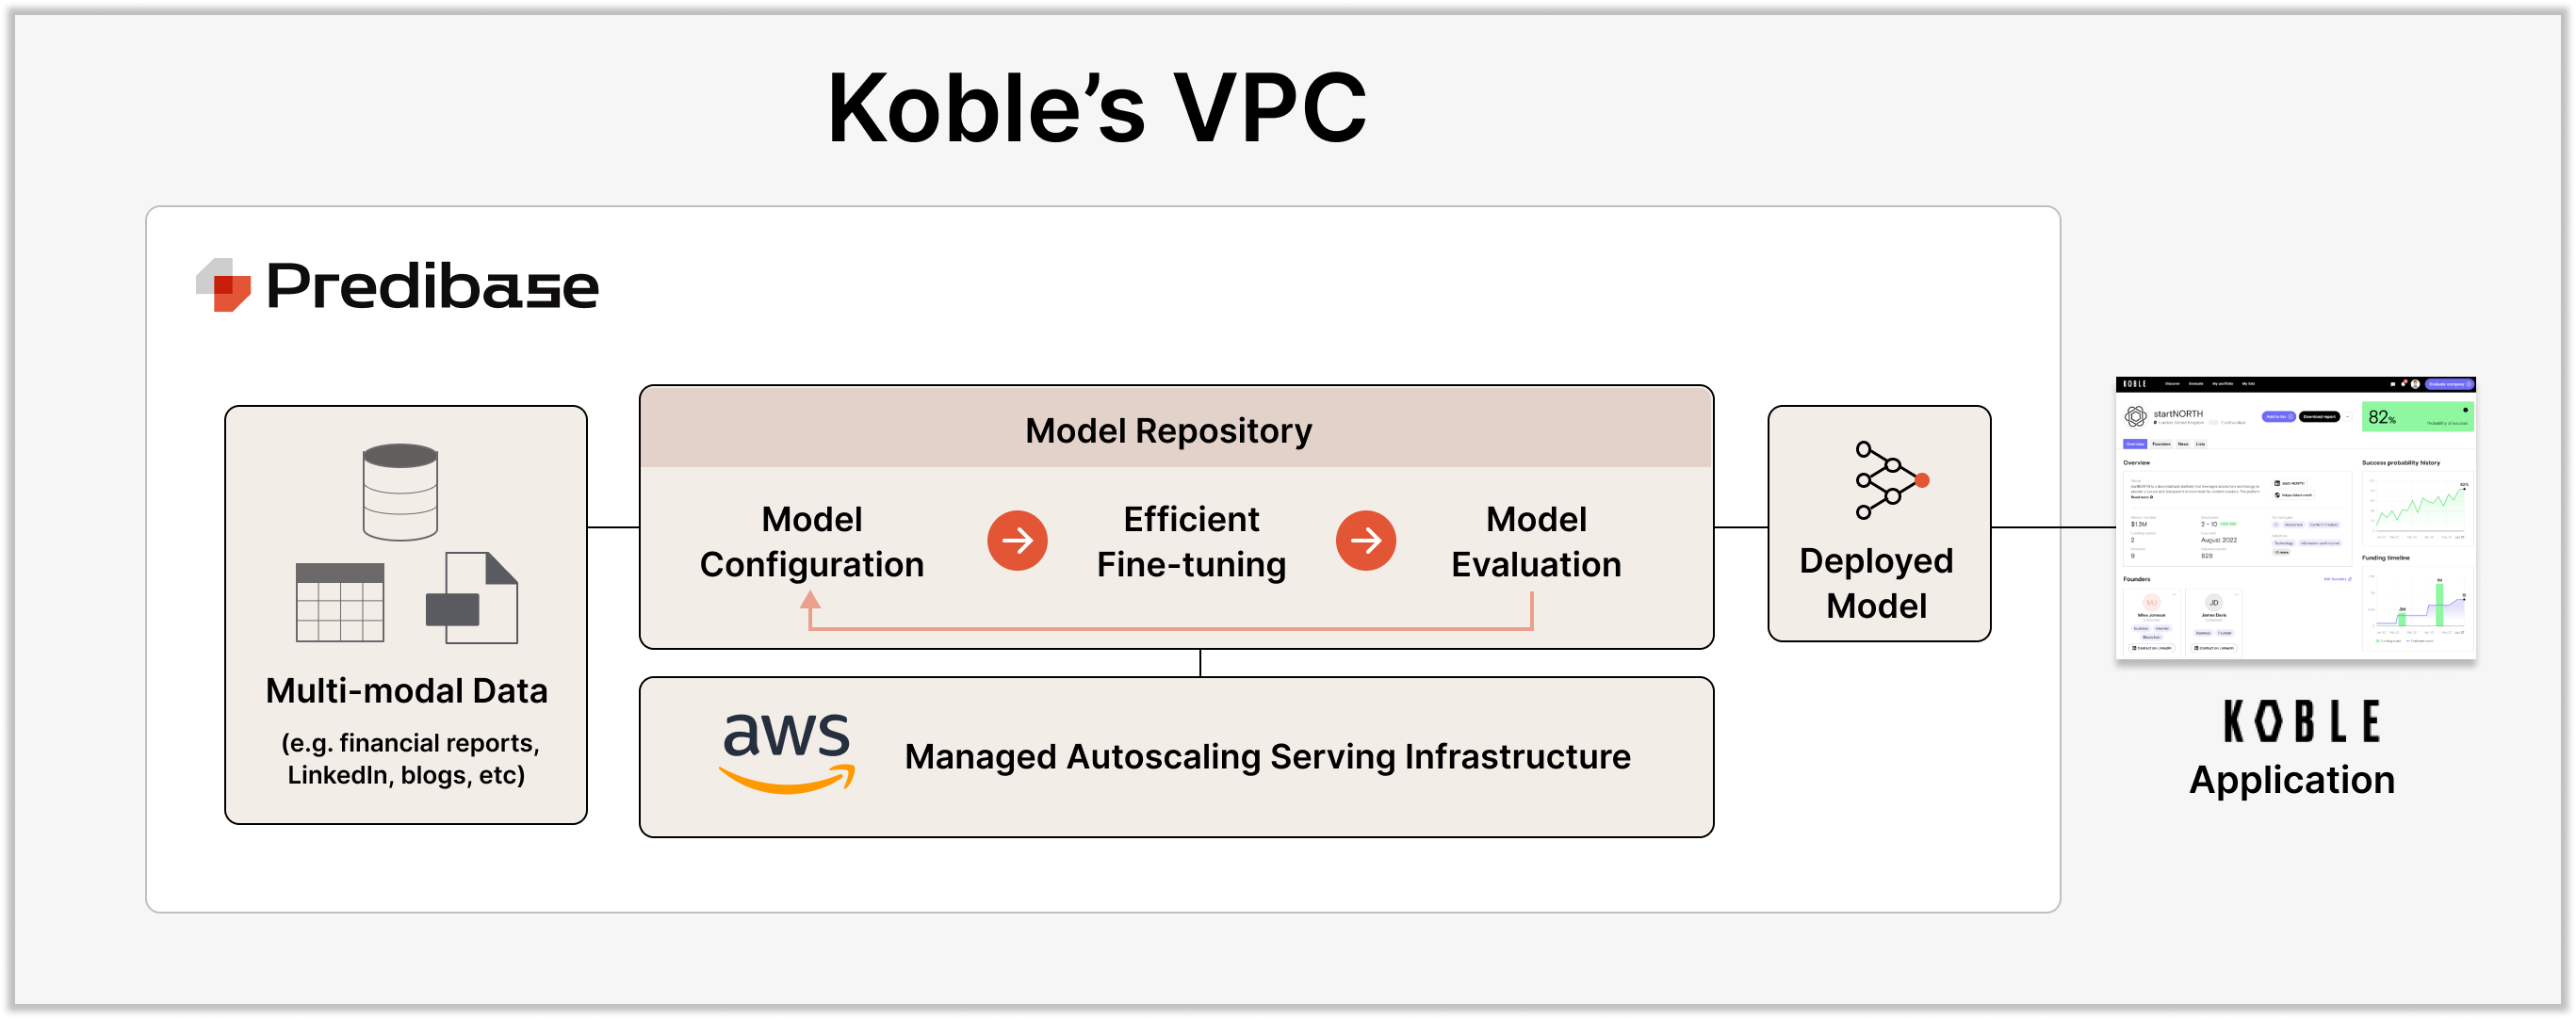 End-to-end model customization and serving in Koble's VPC with Predibase